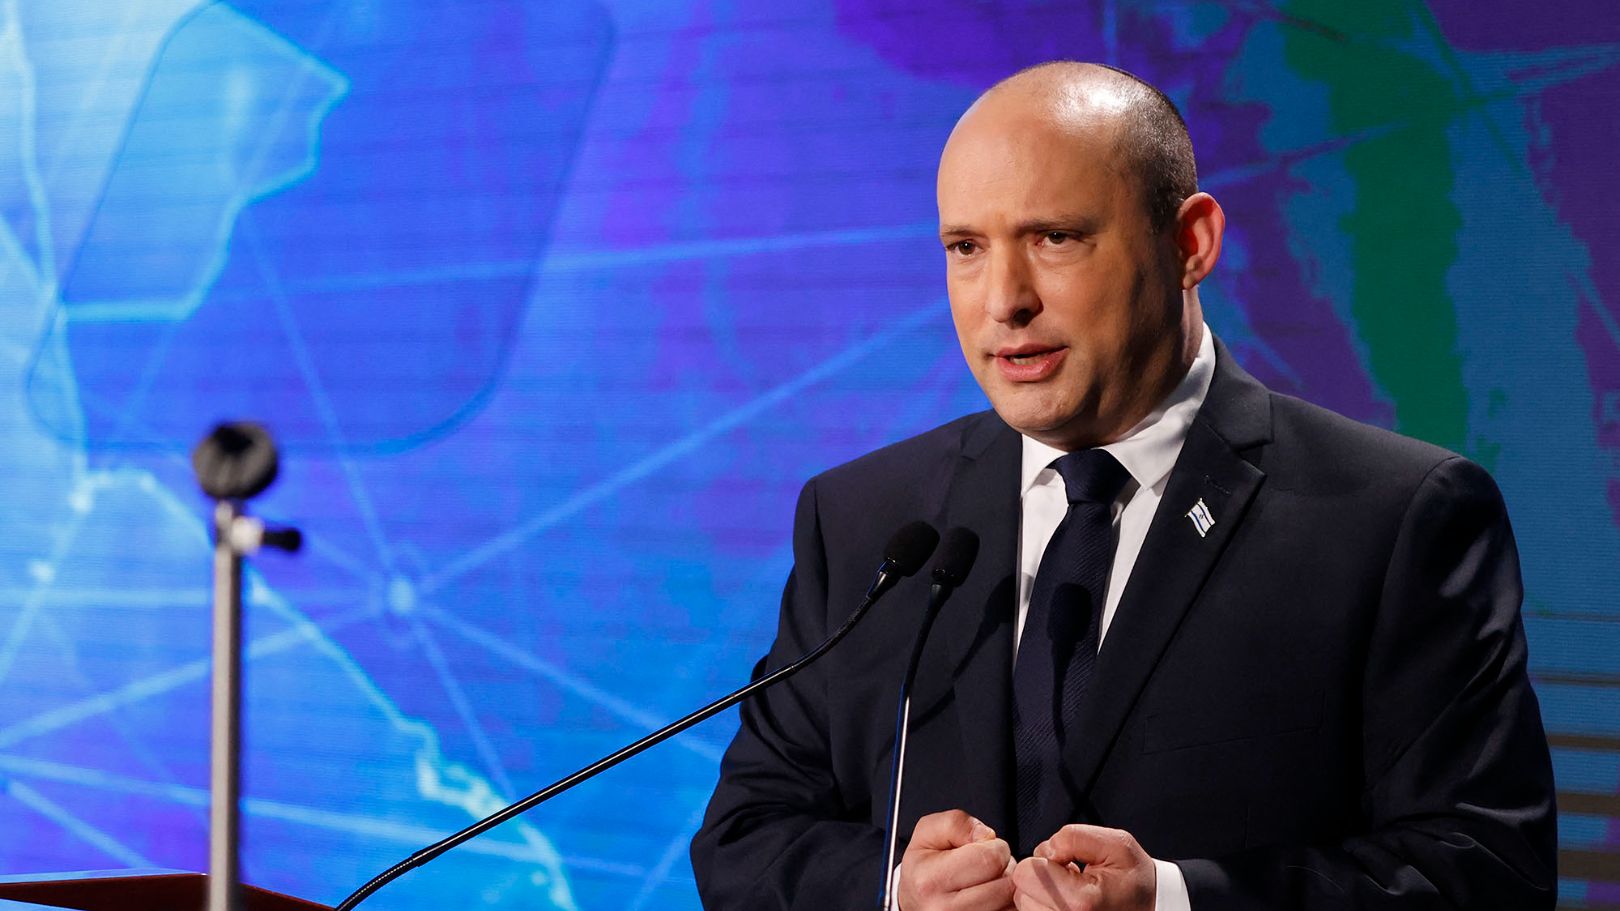 Israel's Prime Minister Naftali Bennett speaks at the Reichman University's Institute for Policy and Strategy (IPS) in the Mediterranean coastal city of Herzliya on November 23, 2021. (Photo by JACK GUEZ / AFP)